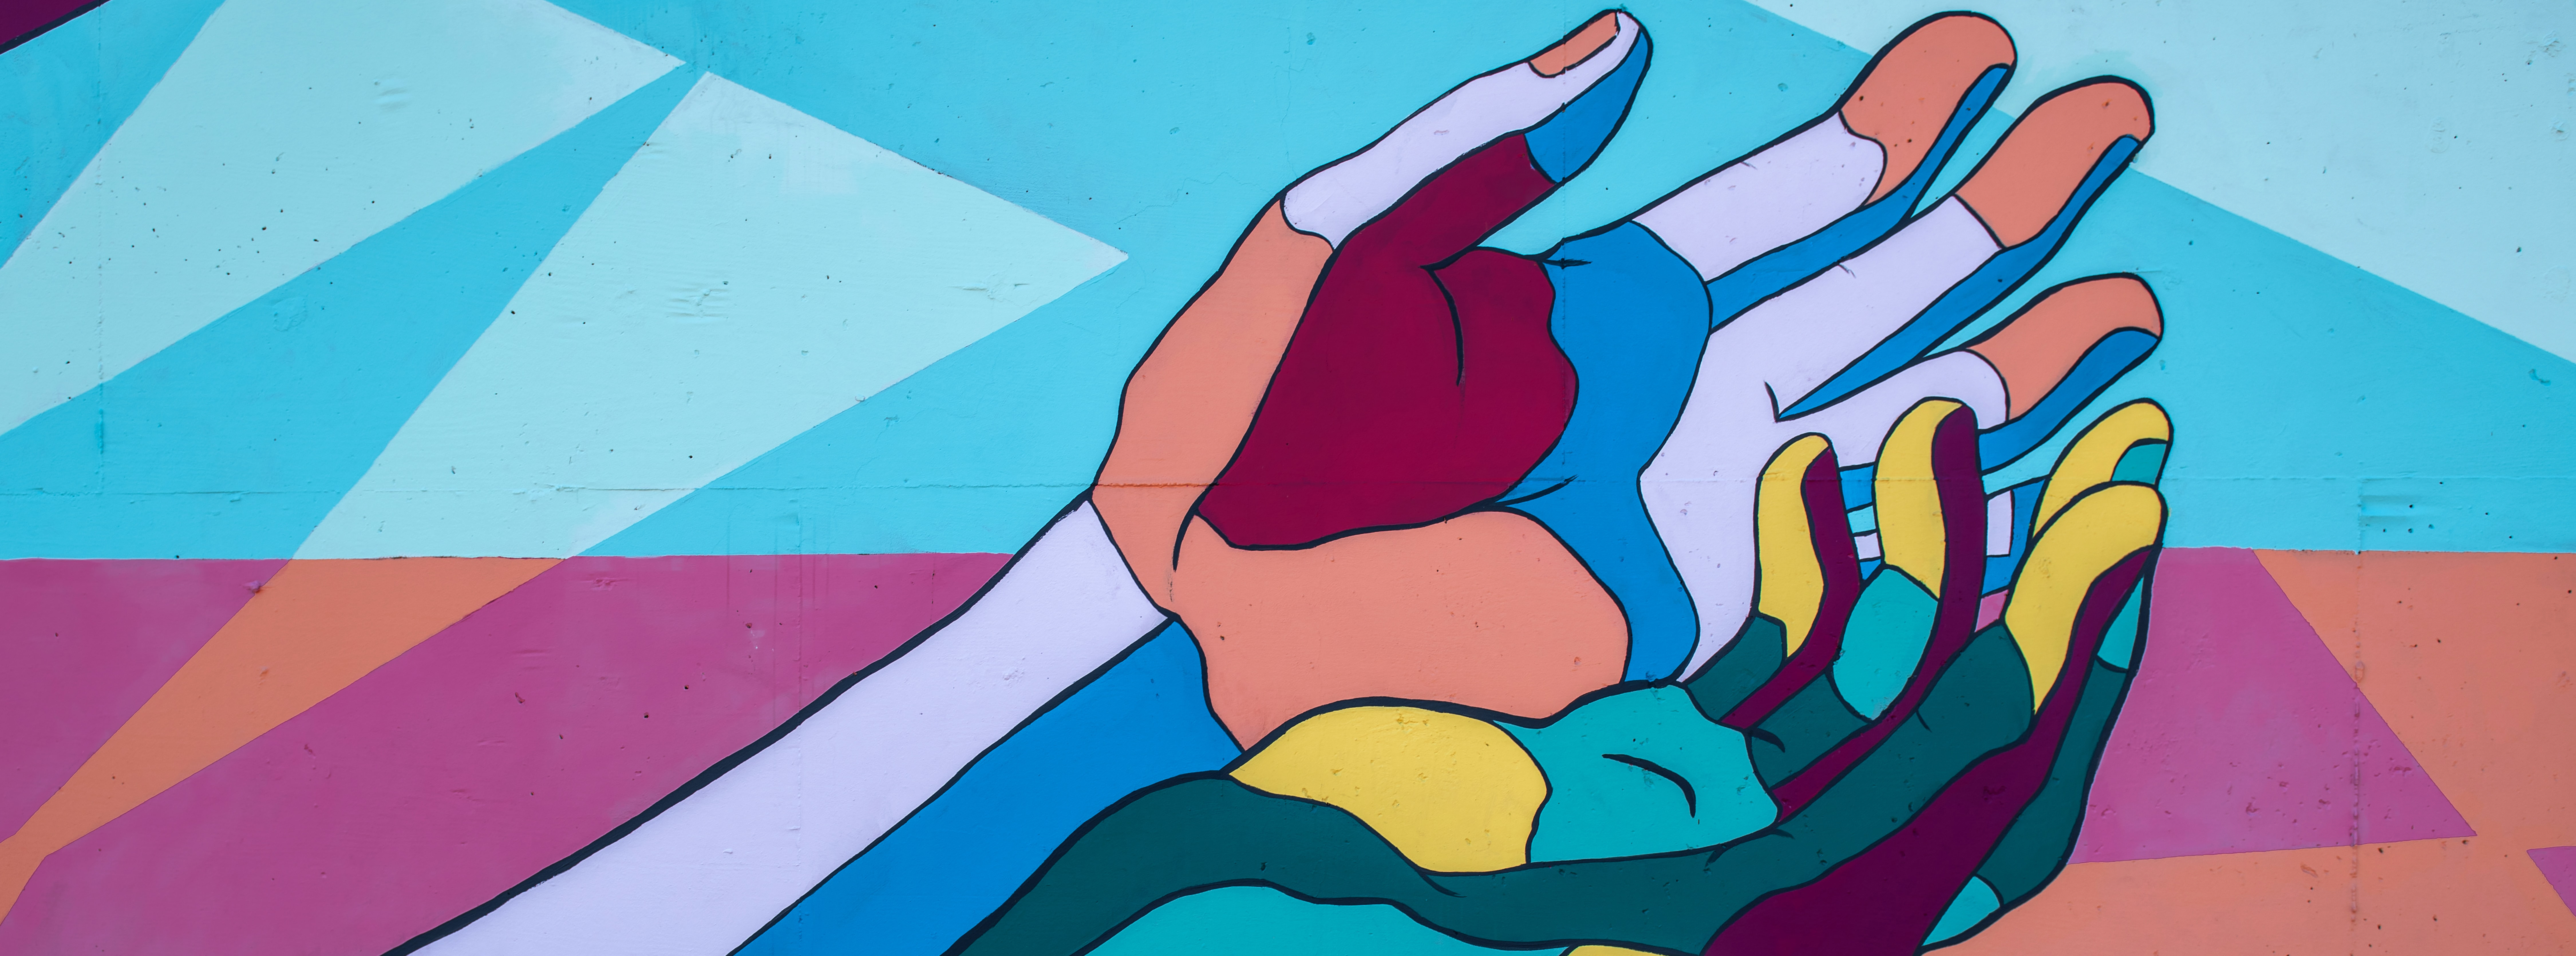 Colorful mural of two hands 